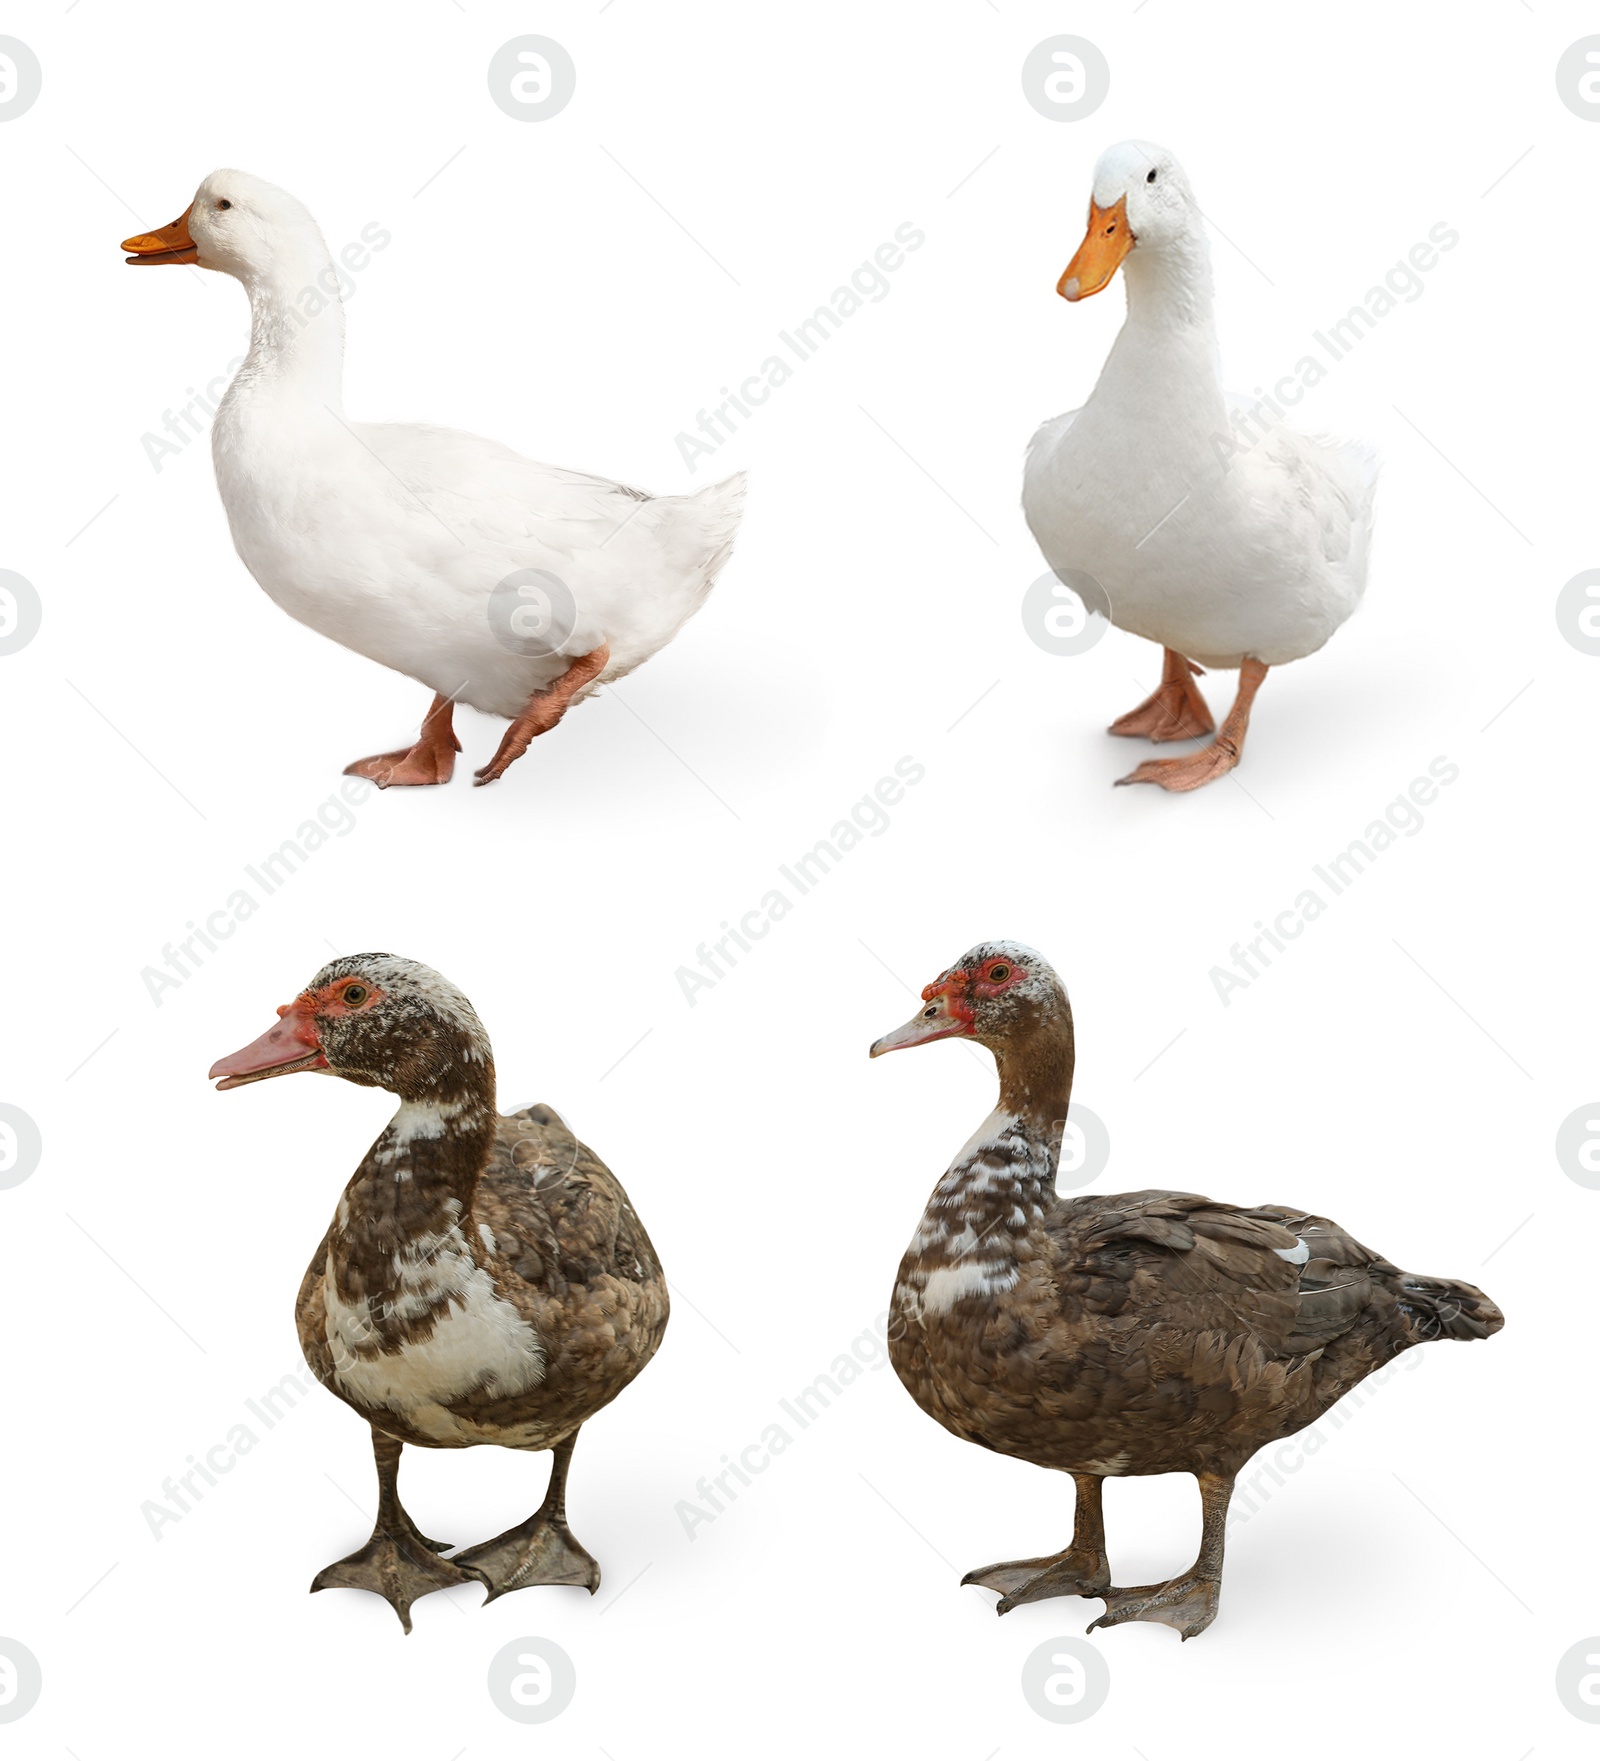 Image of Different ducks on white background, collage. Farm animal